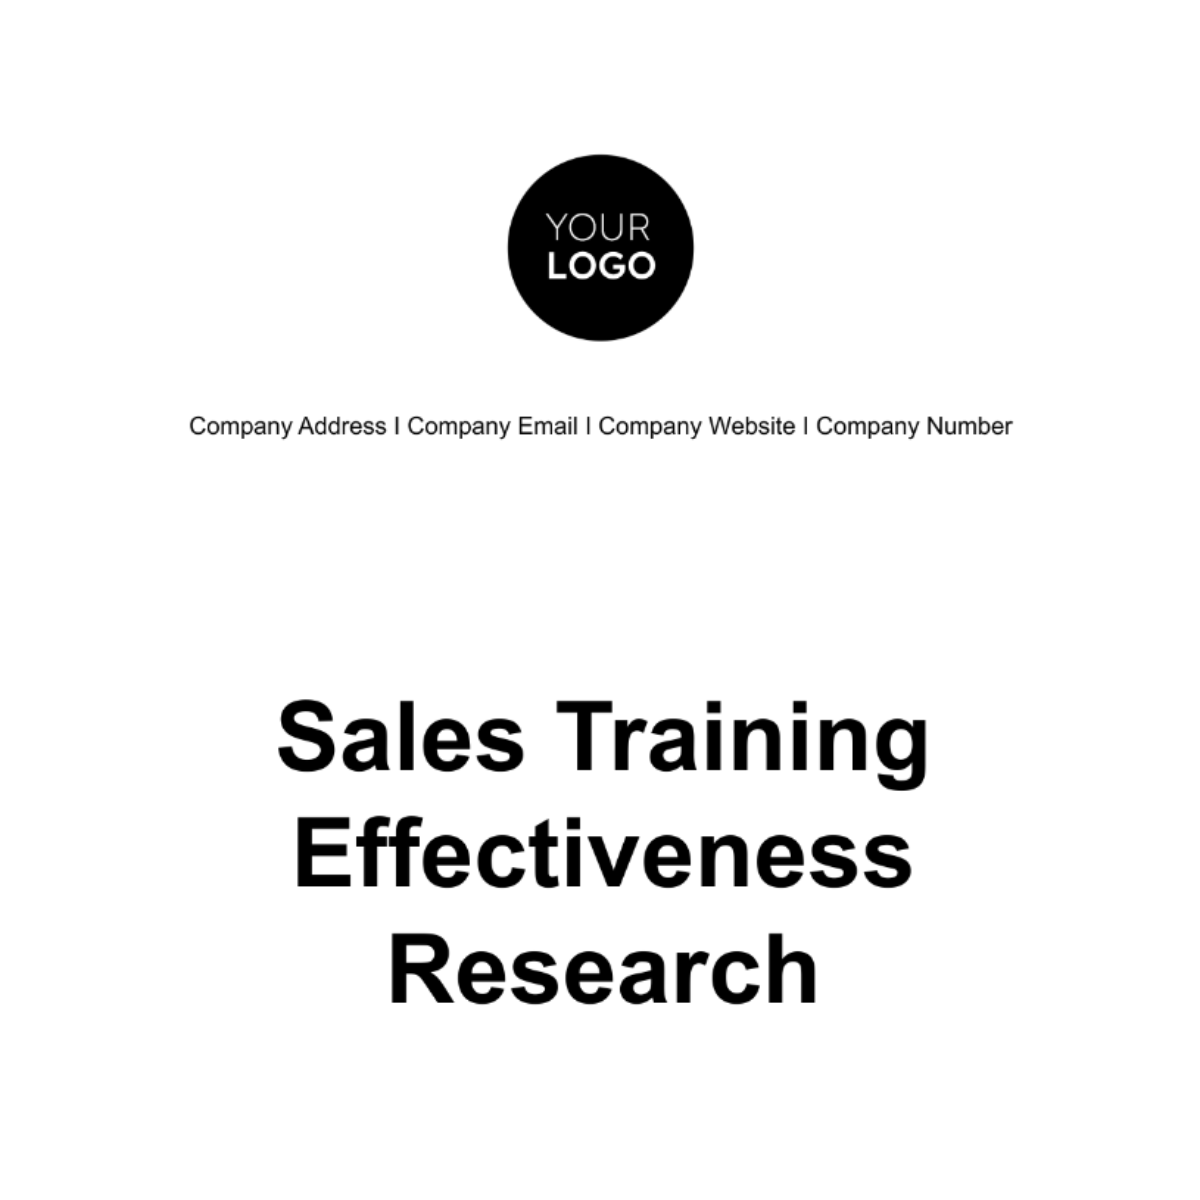 Sales Training Effectiveness Research Template